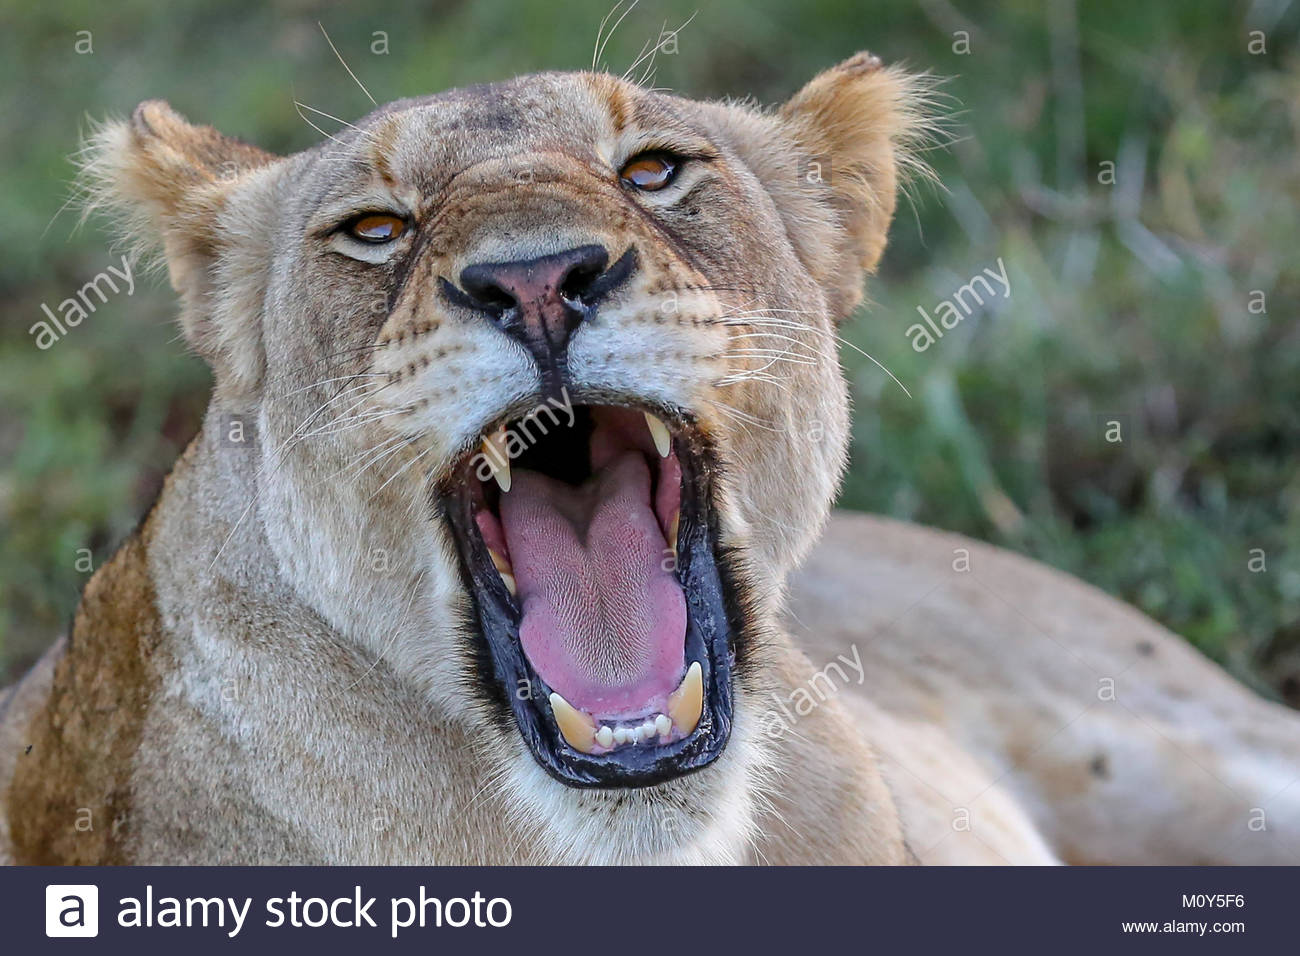 picture of lioness roaring at lion